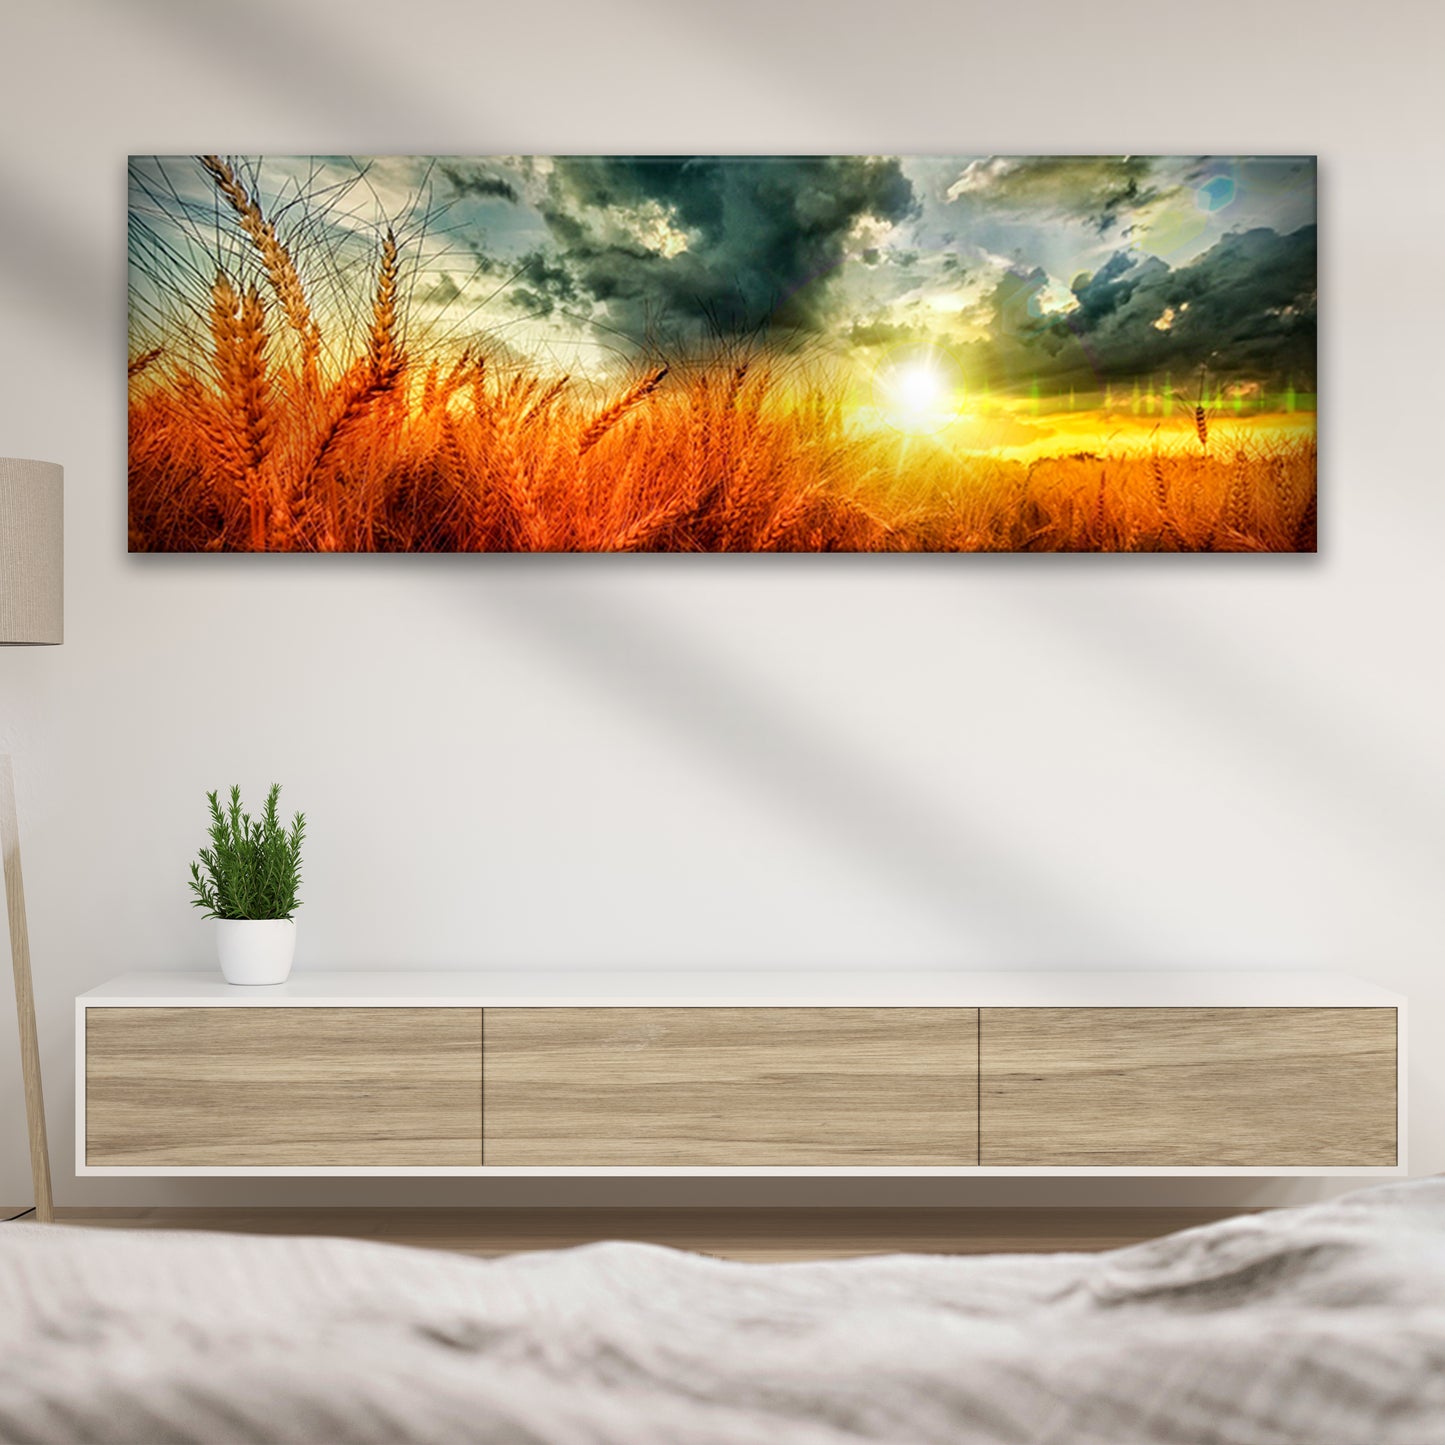 Dusk Falls On The Wheat Field Canvas Wall Art Style 2 - Image by Tailored Canvases